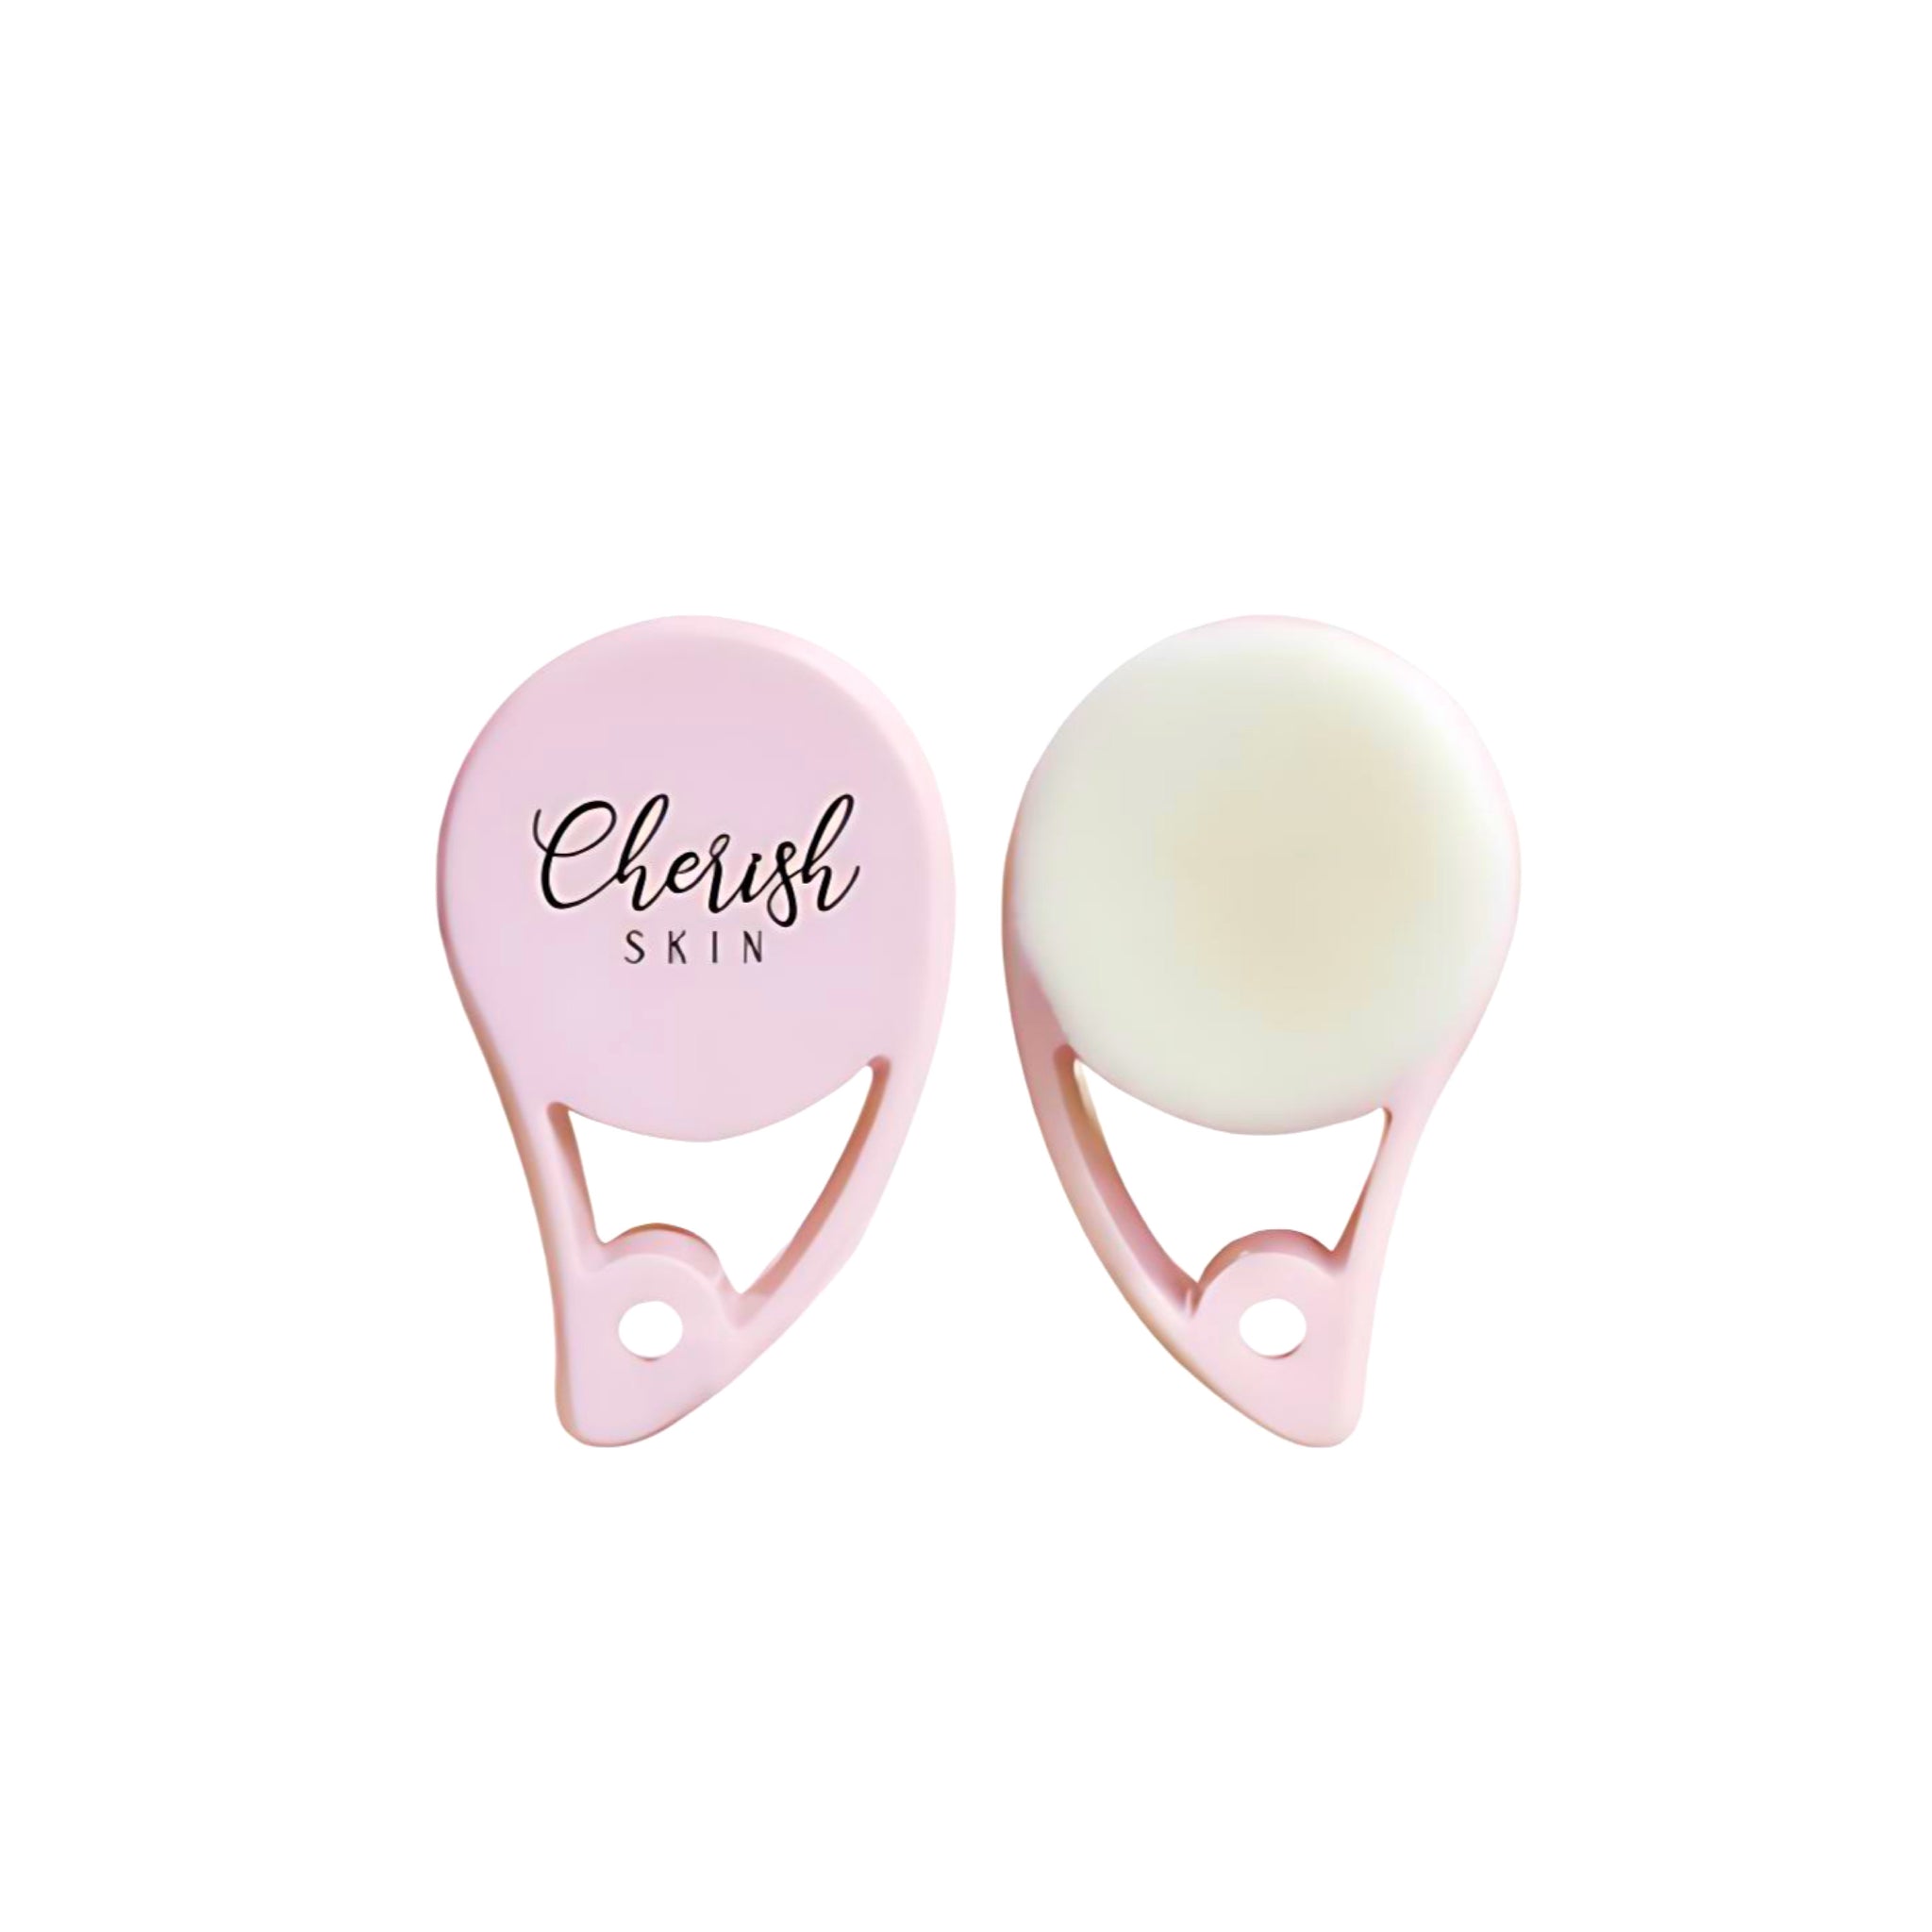 NEW! Soft Pink Cleansing Brush